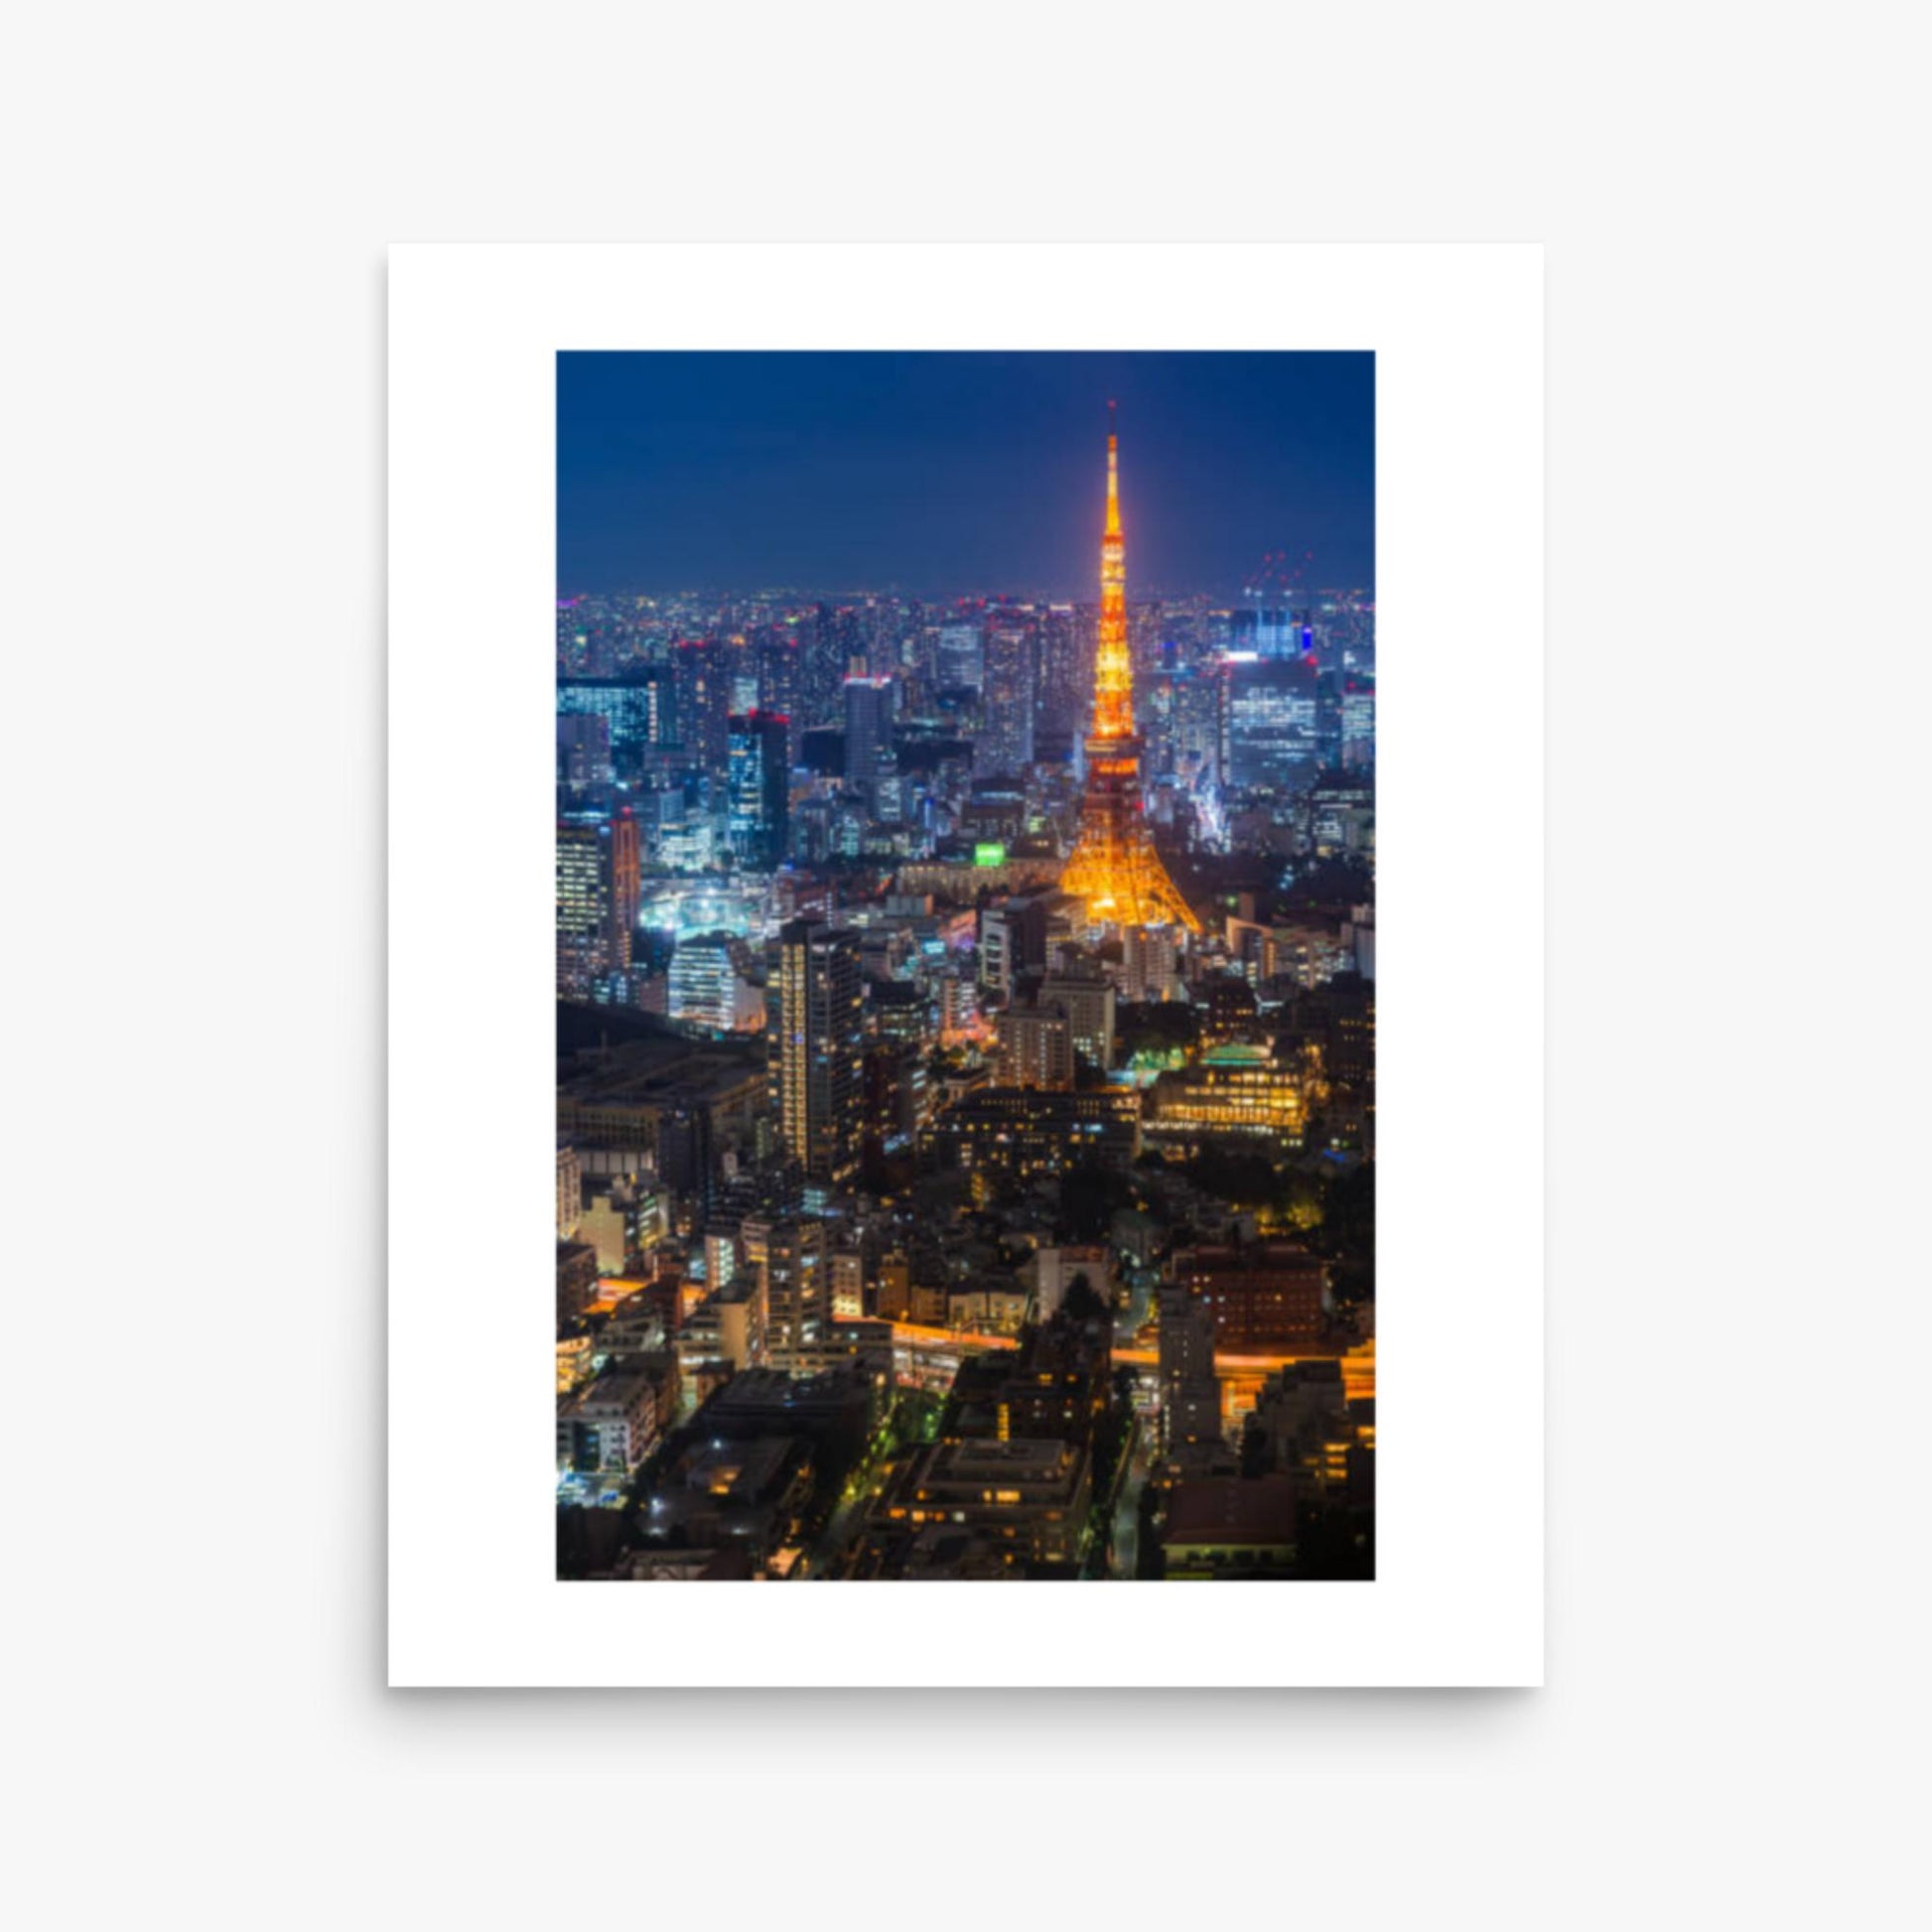 Tokyo Tower illuminated 16x20 in Poster